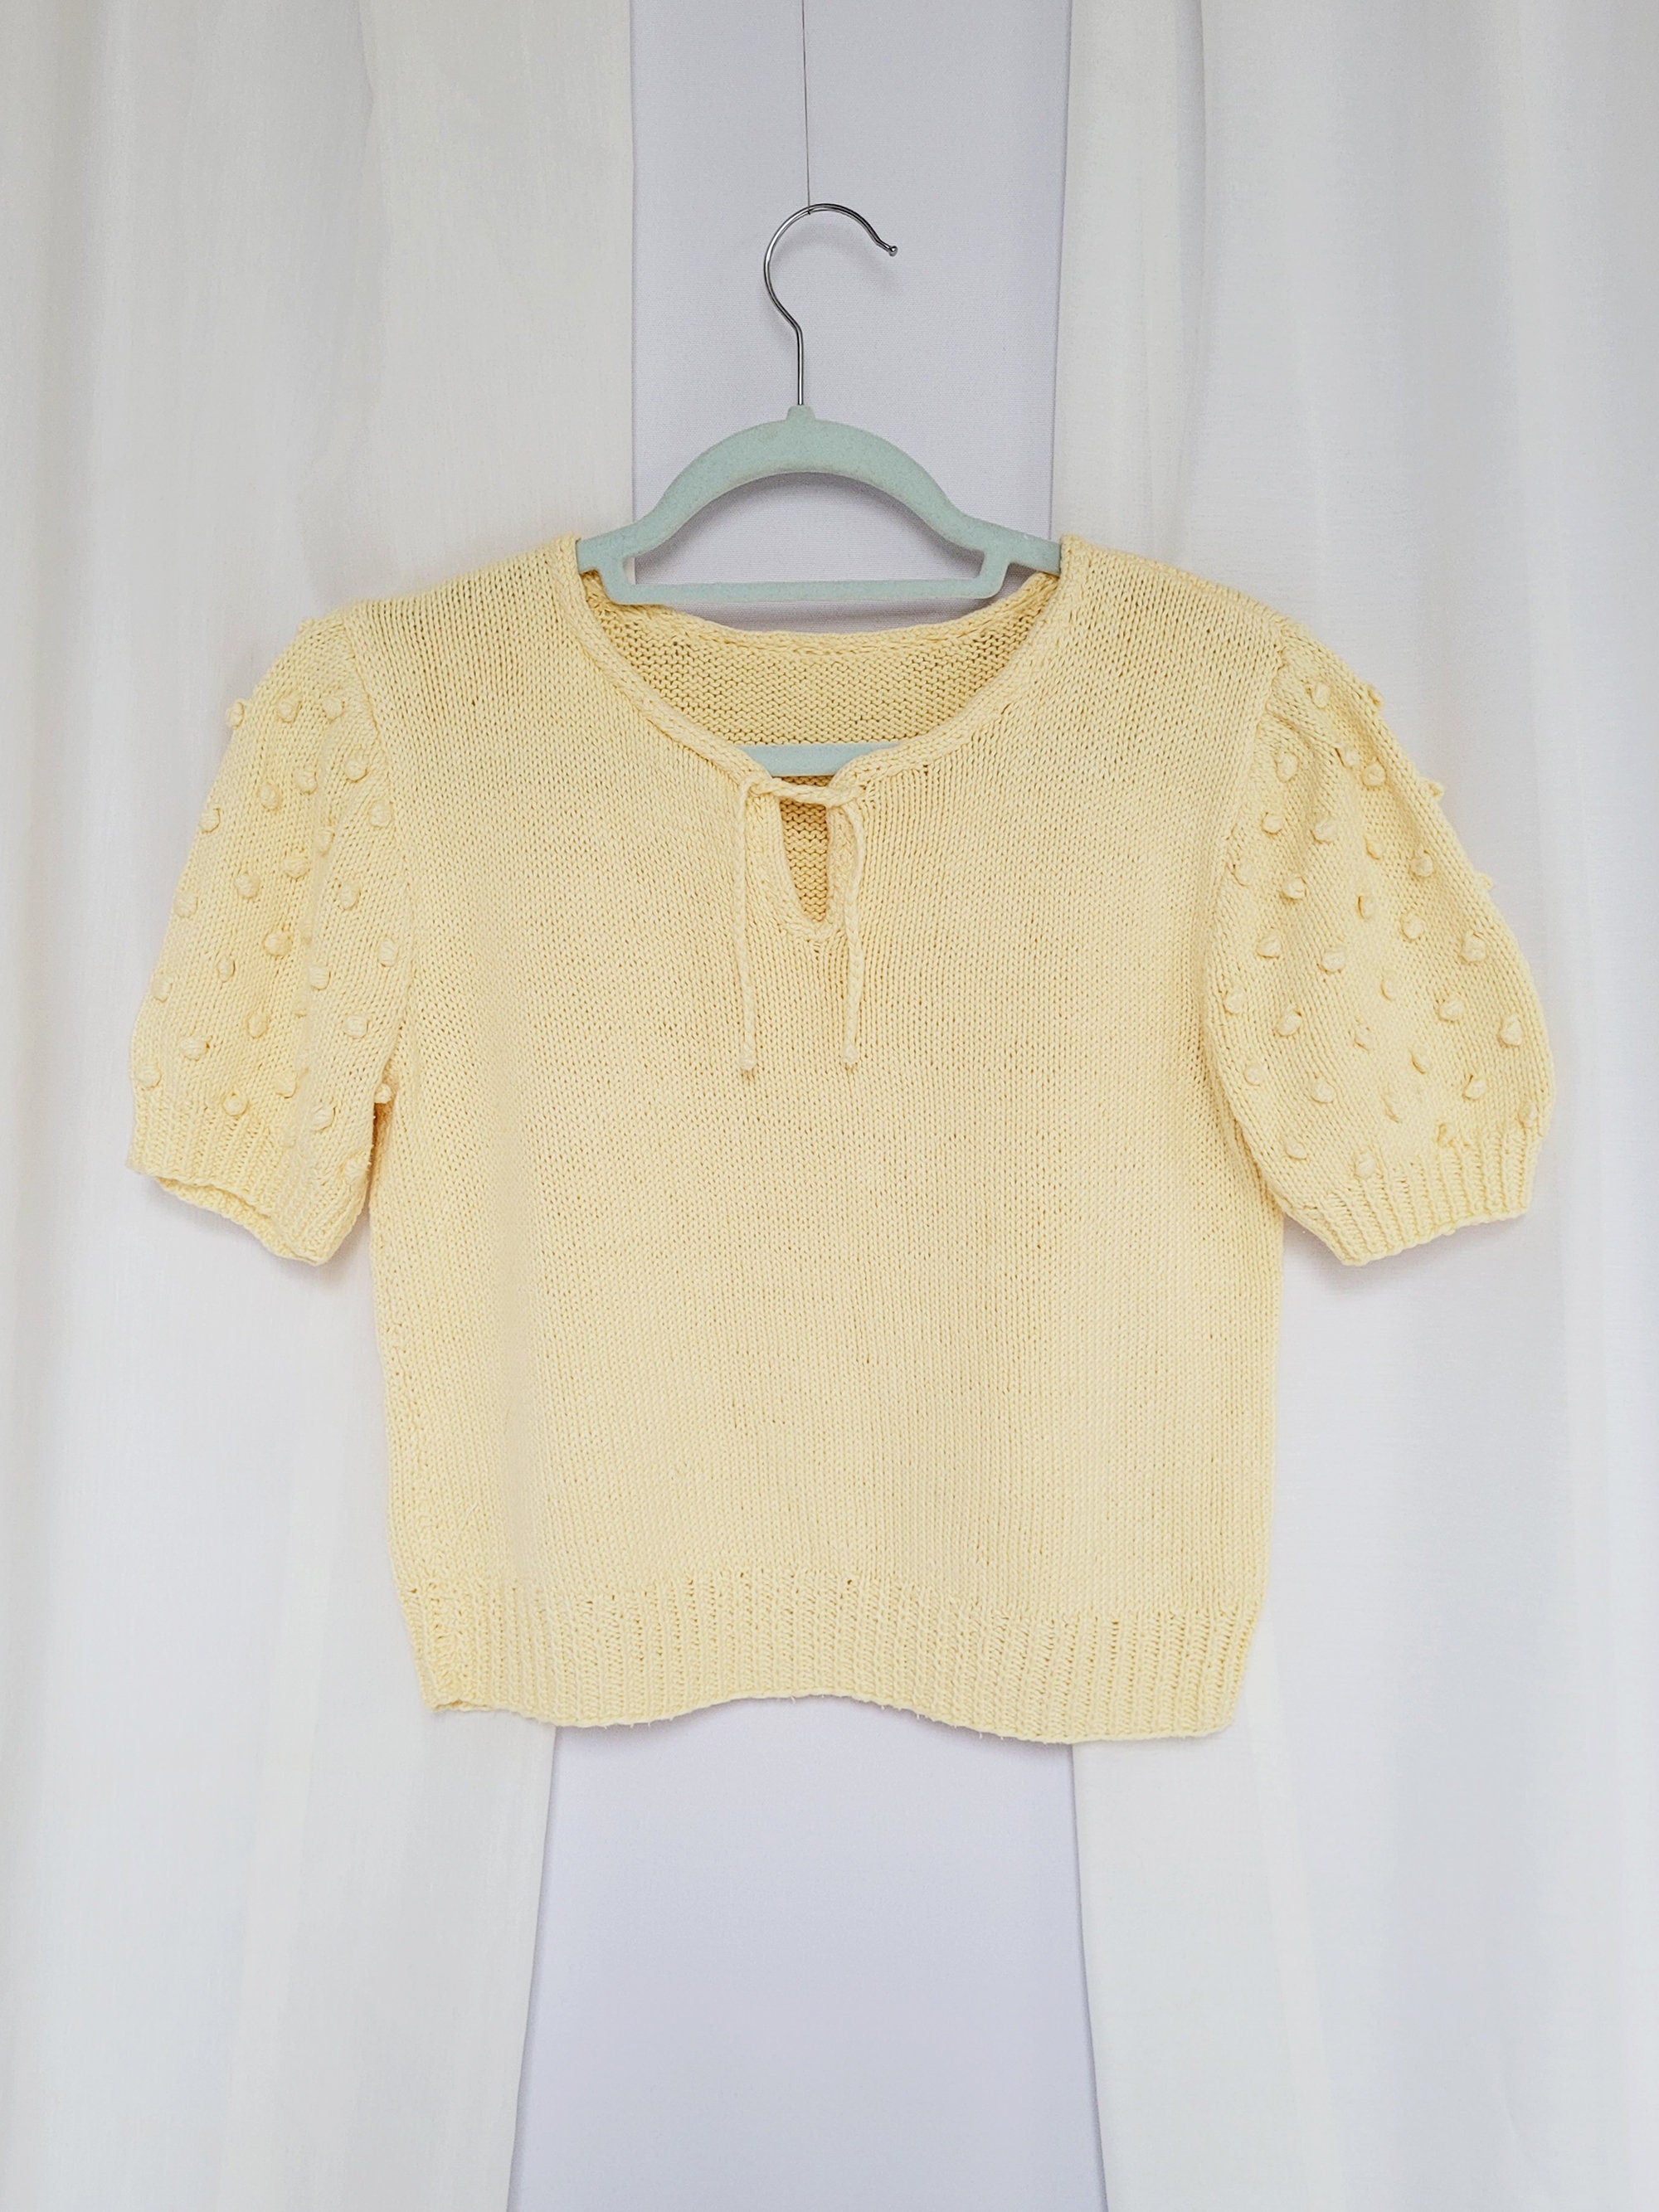 90s minimalist handmade cable knitted pastel yellow top